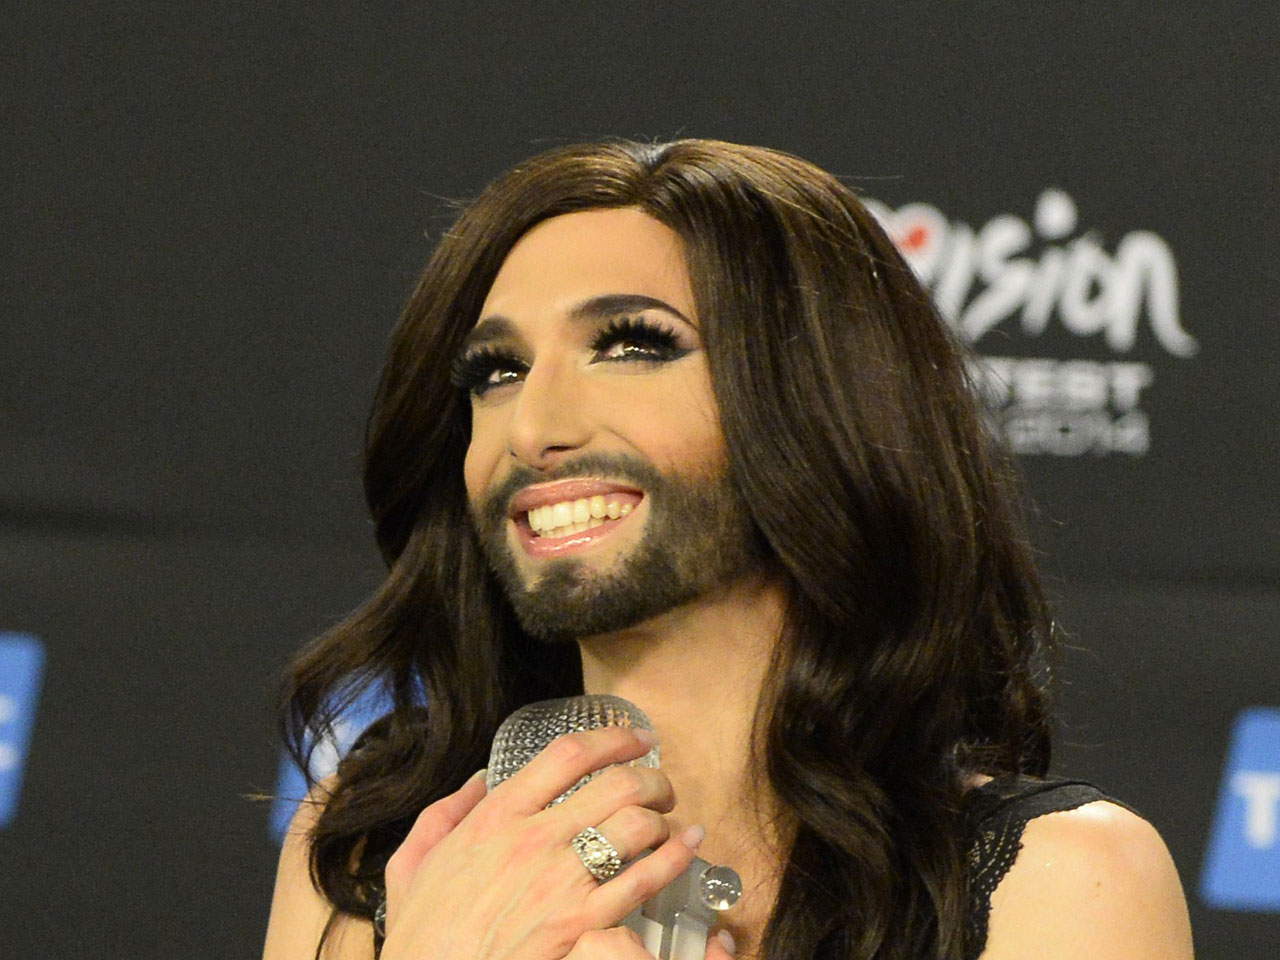 Conchita Wurst, bearded drag queen, wins Eurovision Song Contest CBS News